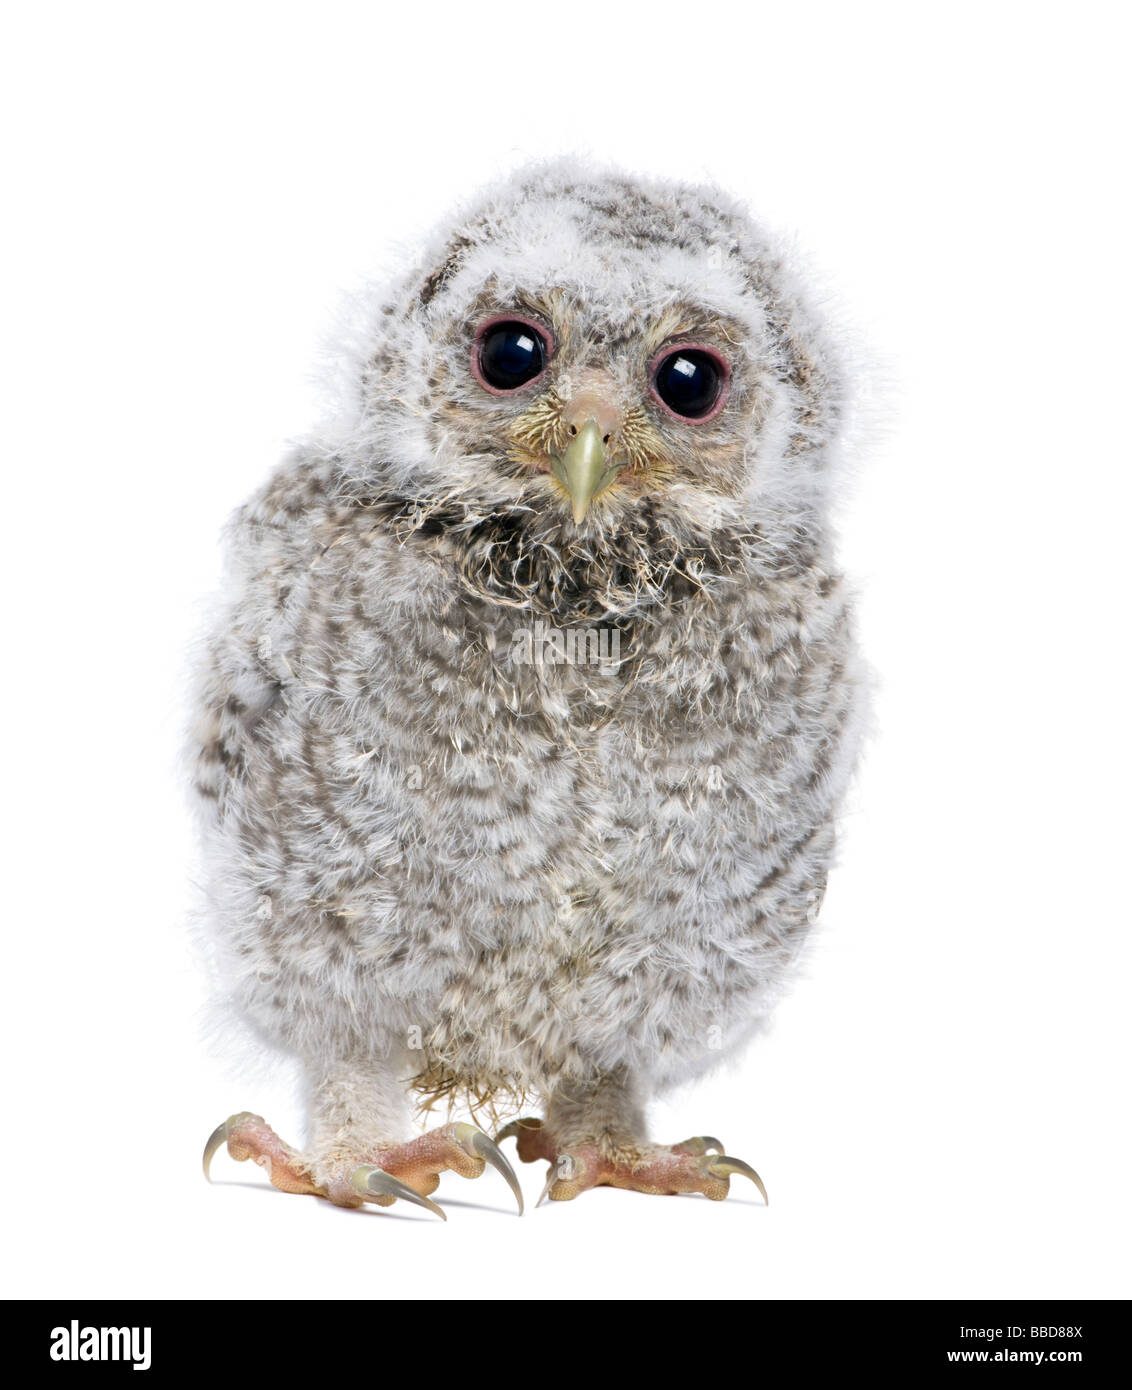 front view of a owlet looking at the camera Athene noctua 4 weeks old in front of a white background Stock Photo